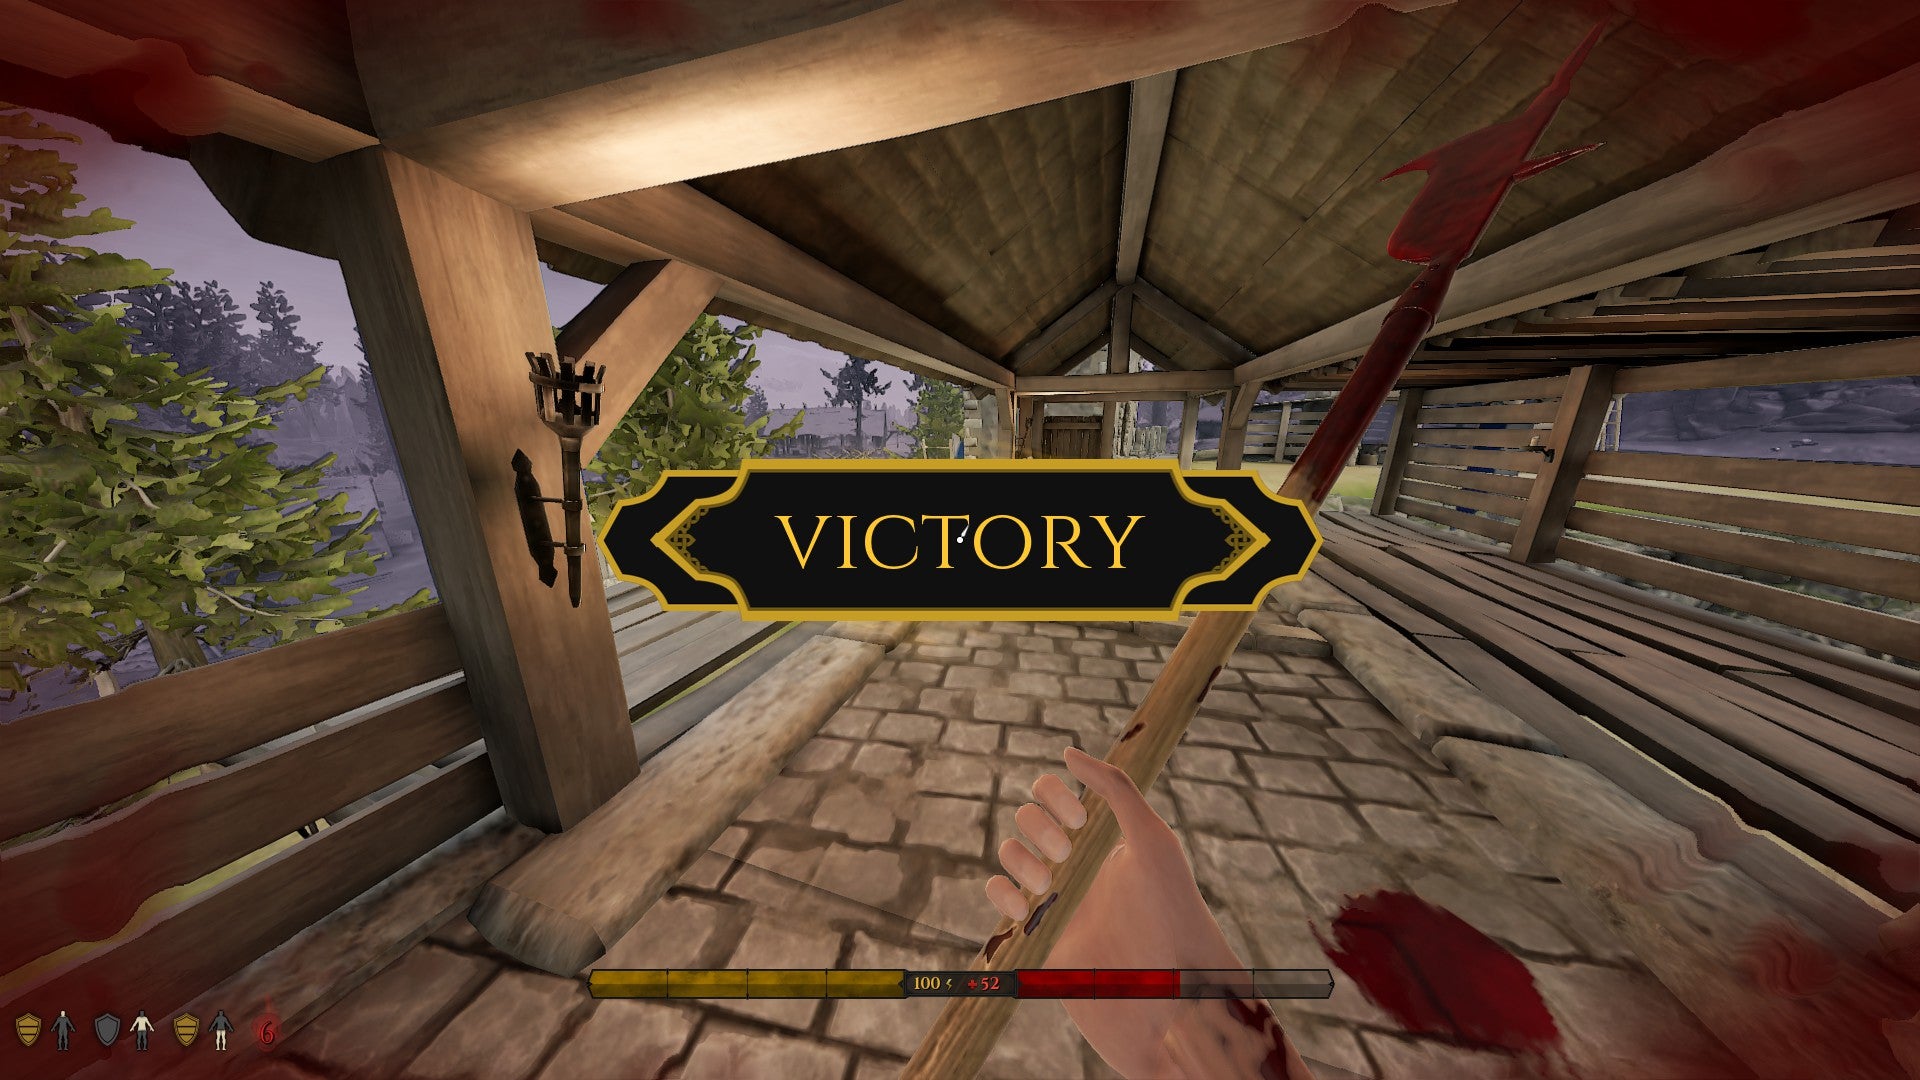 Image for Mordhau Battle Royale tips - how to consistently win Mordhau's Battle Royale matches